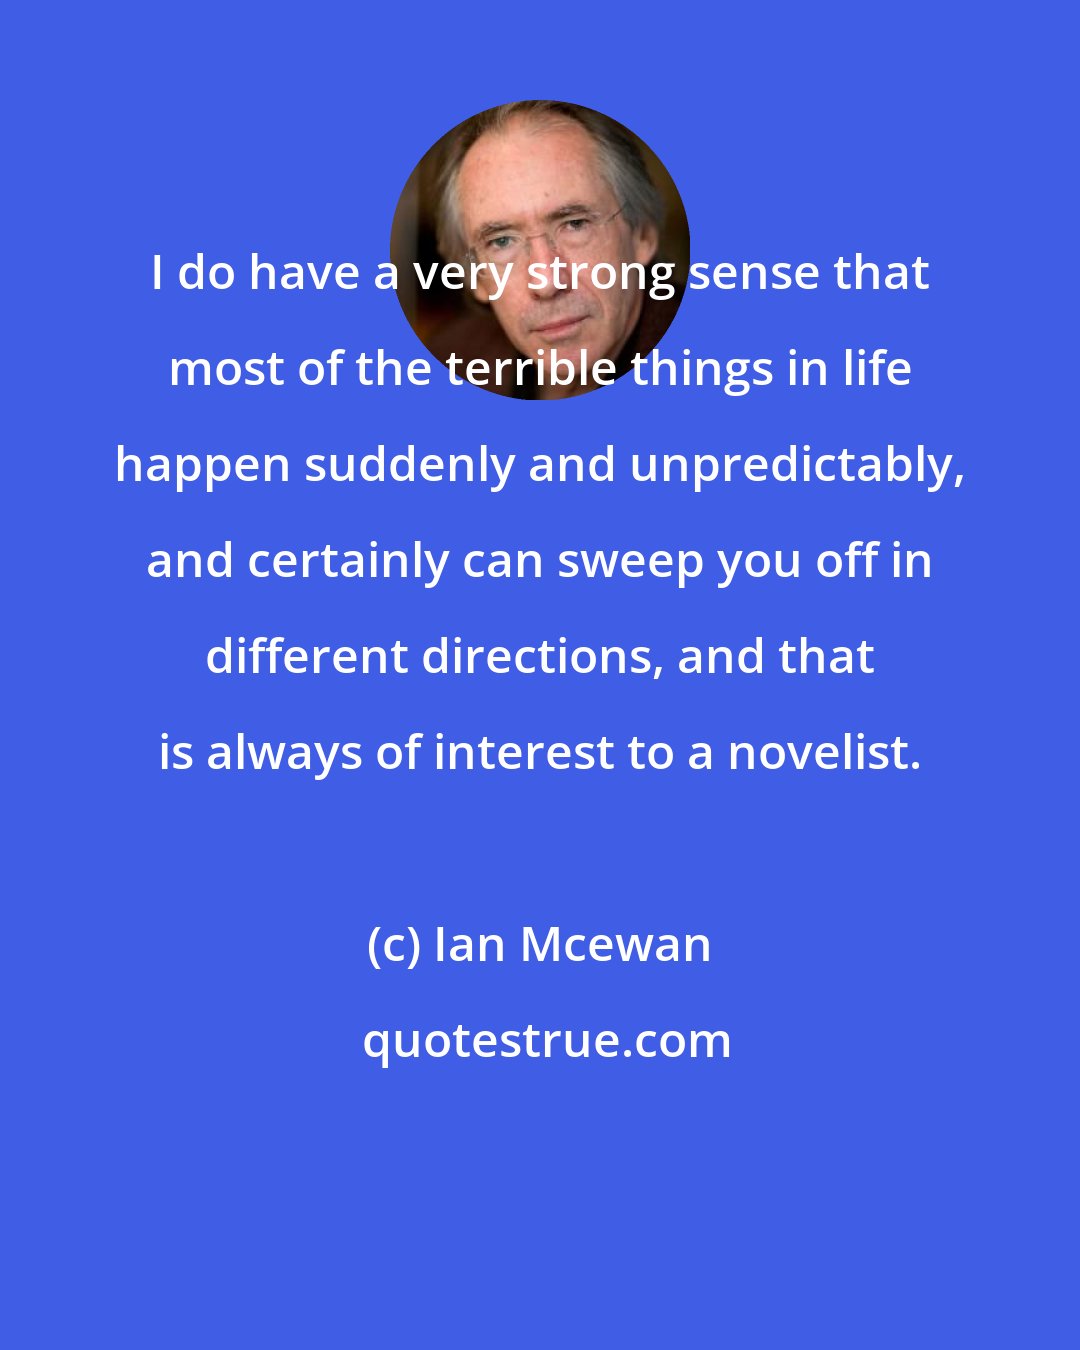 Ian Mcewan: I do have a very strong sense that most of the terrible things in life happen suddenly and unpredictably, and certainly can sweep you off in different directions, and that is always of interest to a novelist.